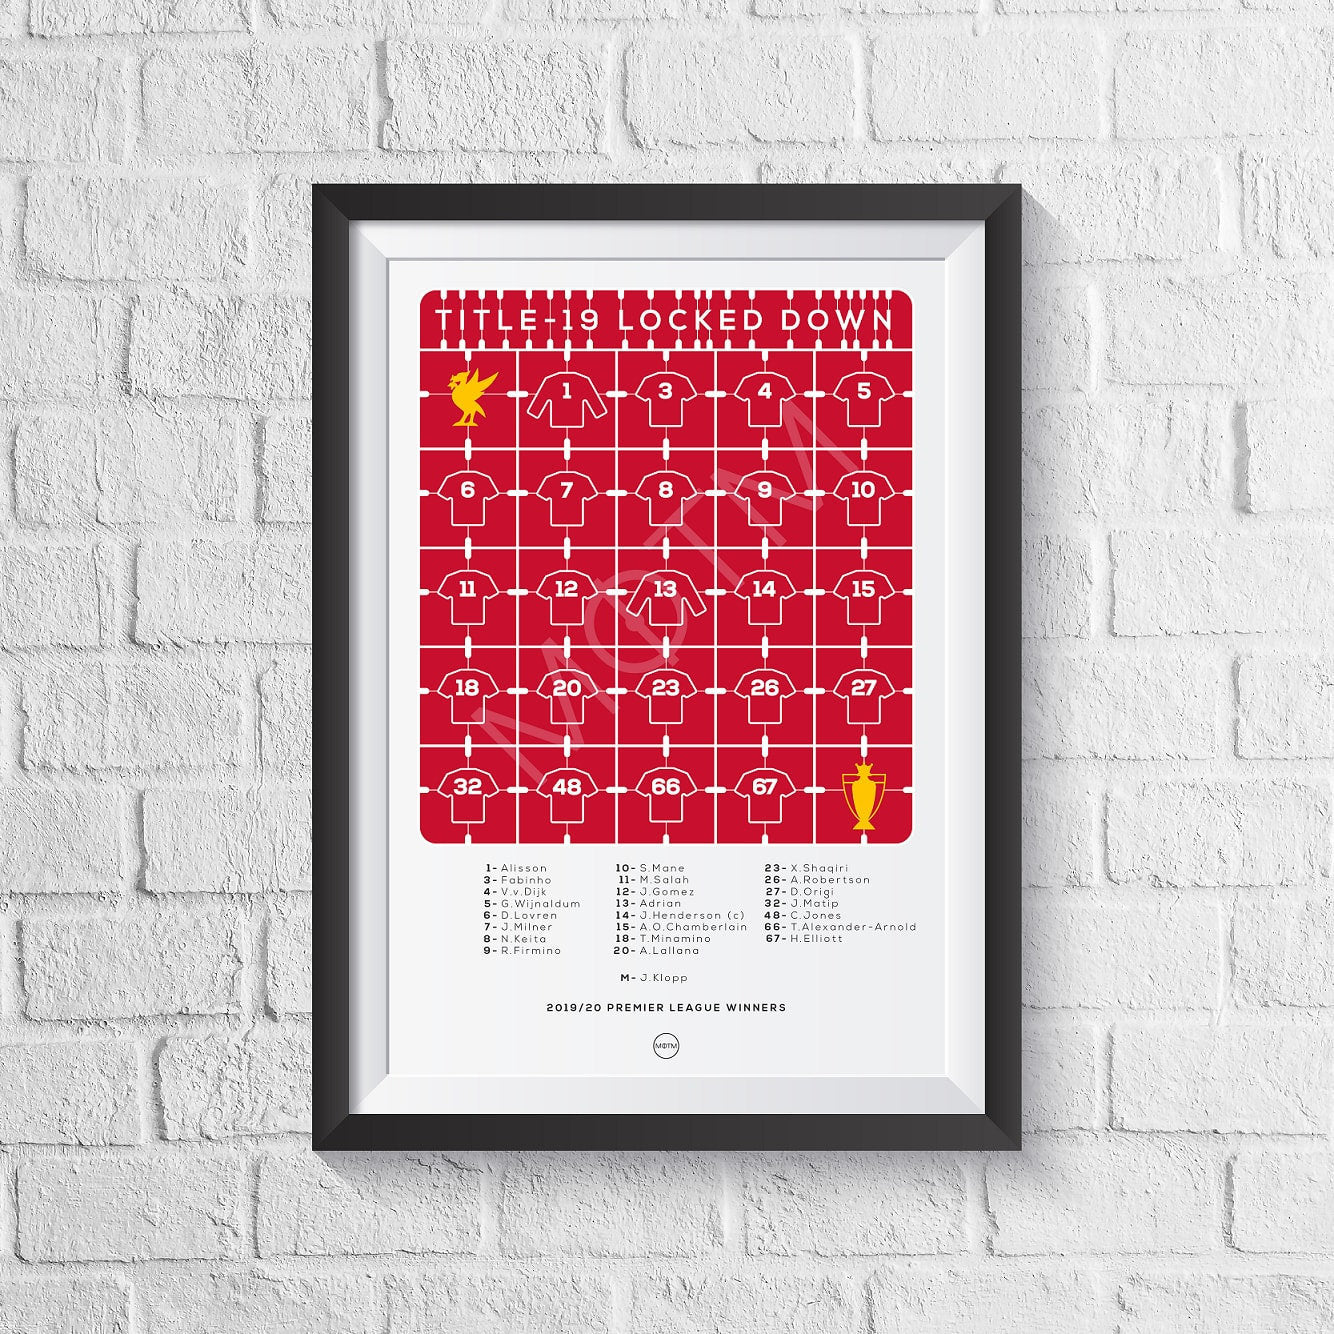 Liverpool 'Title-19 Locked Down' 2019/2020 Print - Man of The Match Football